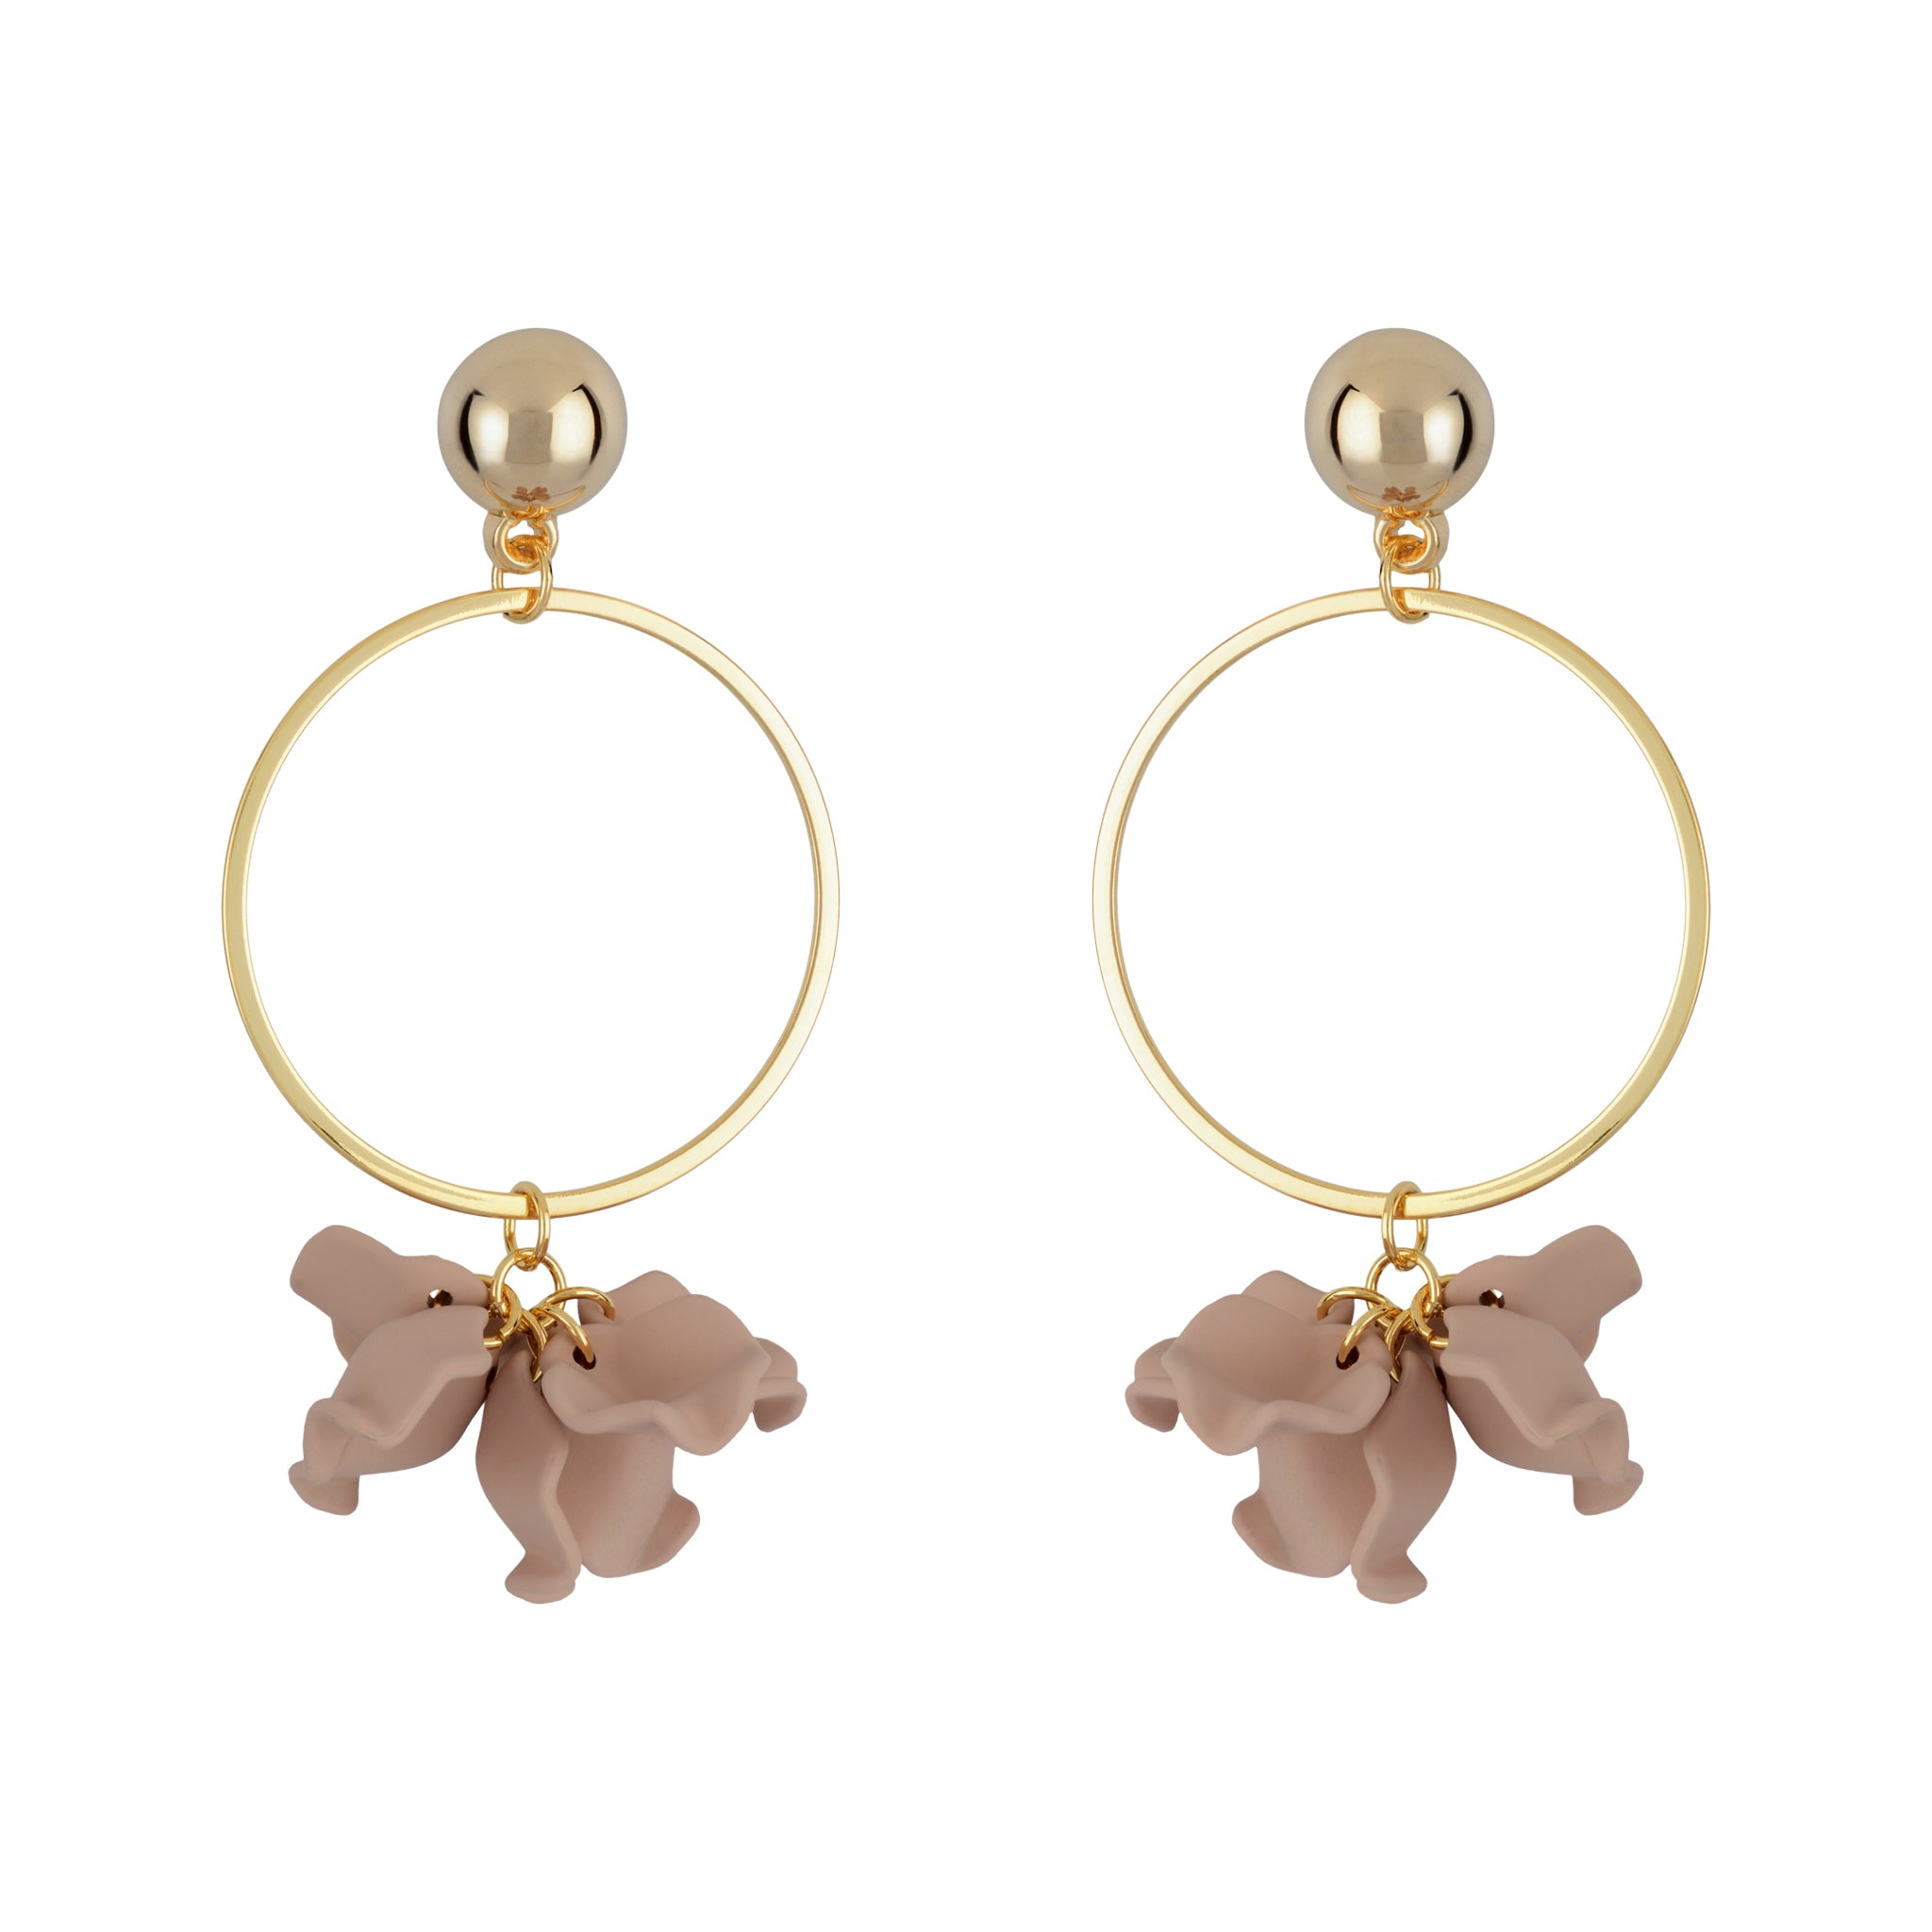 Suspended Gold Ring Petal Earrings - Nude